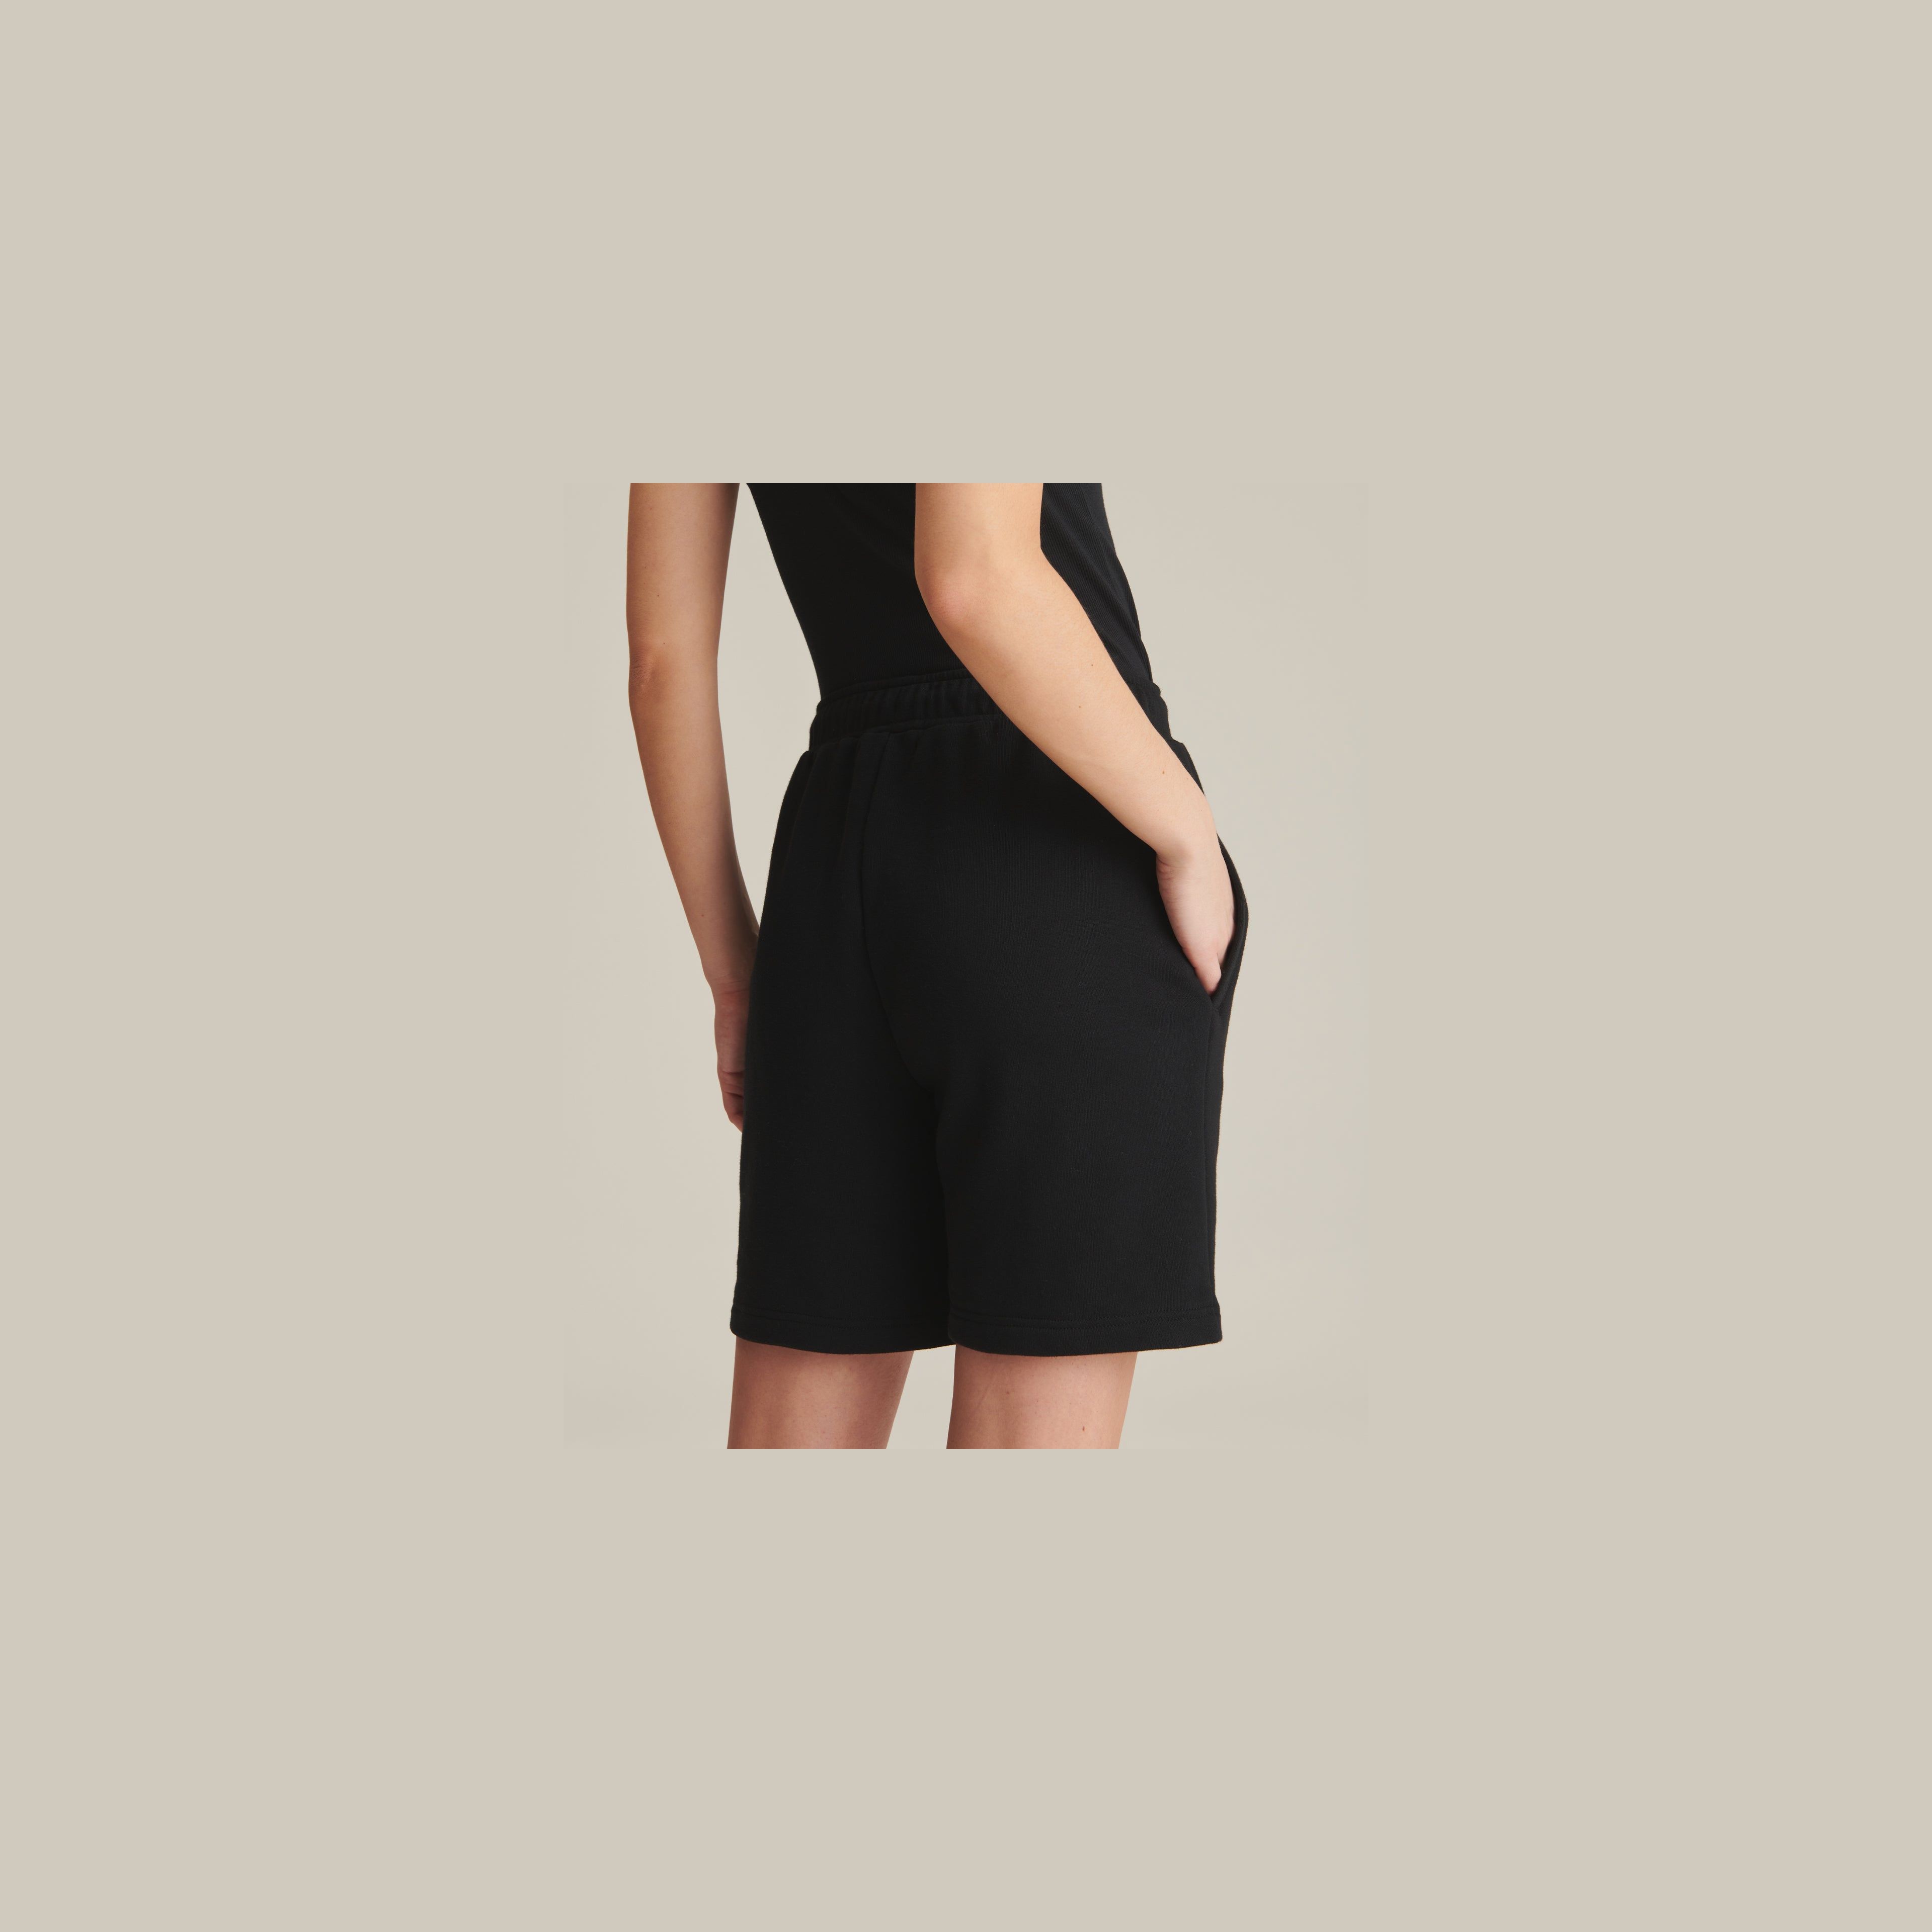 Unisex French Terry Short